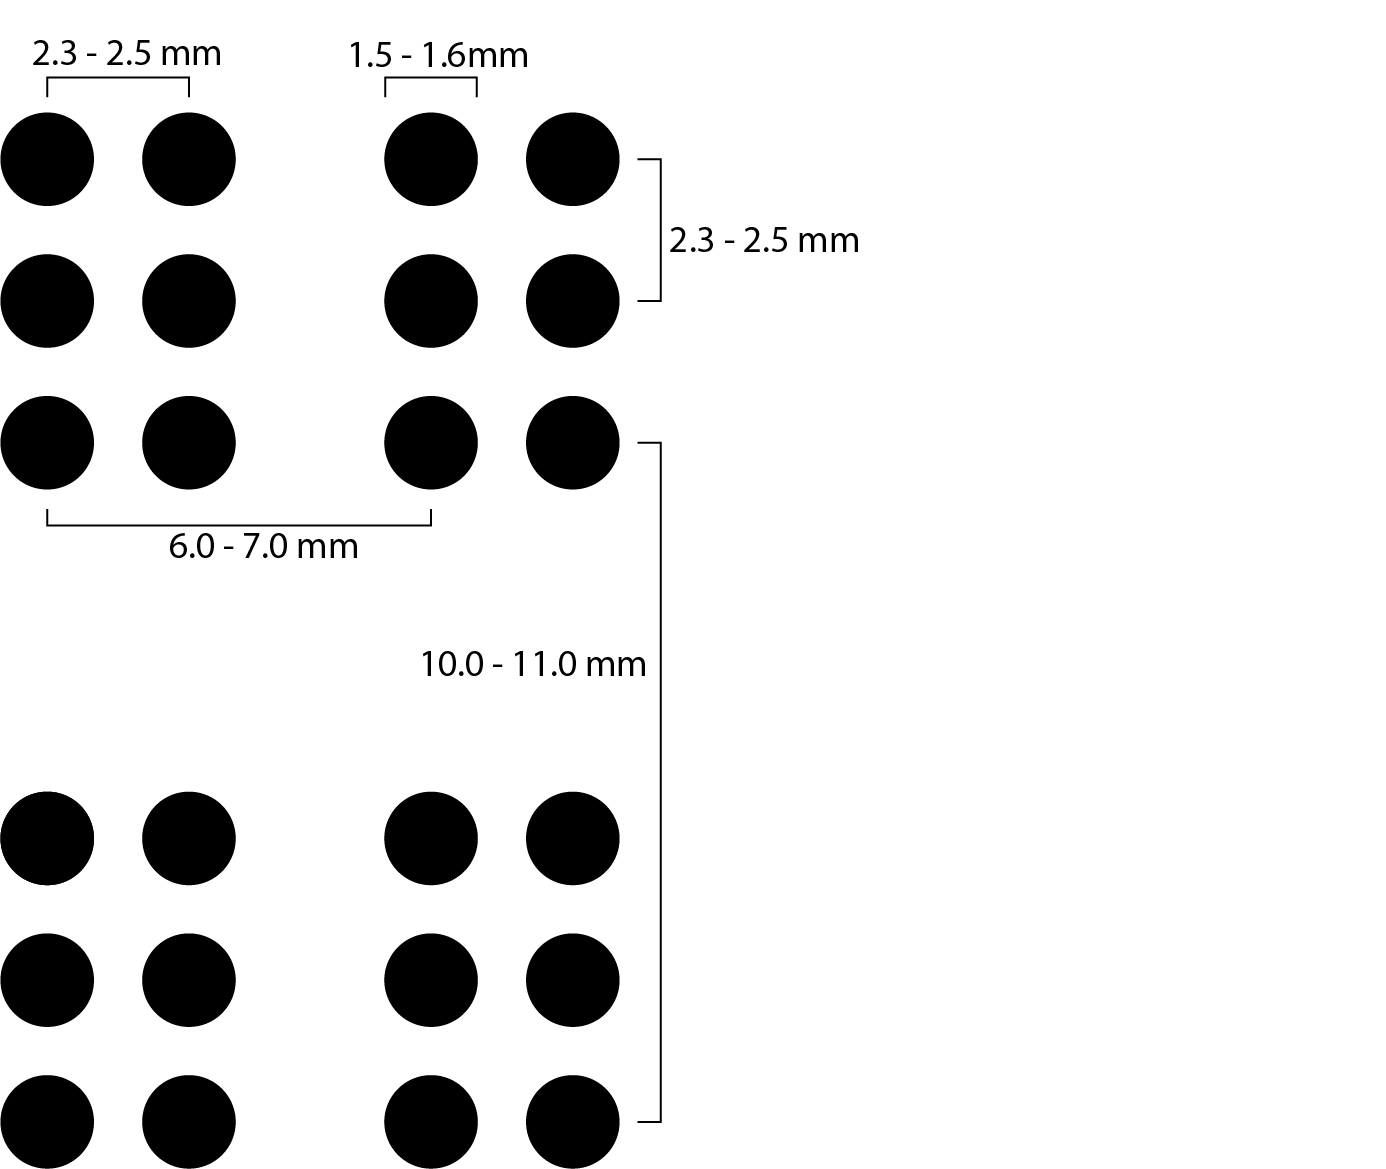 Braille Dot Dimensions